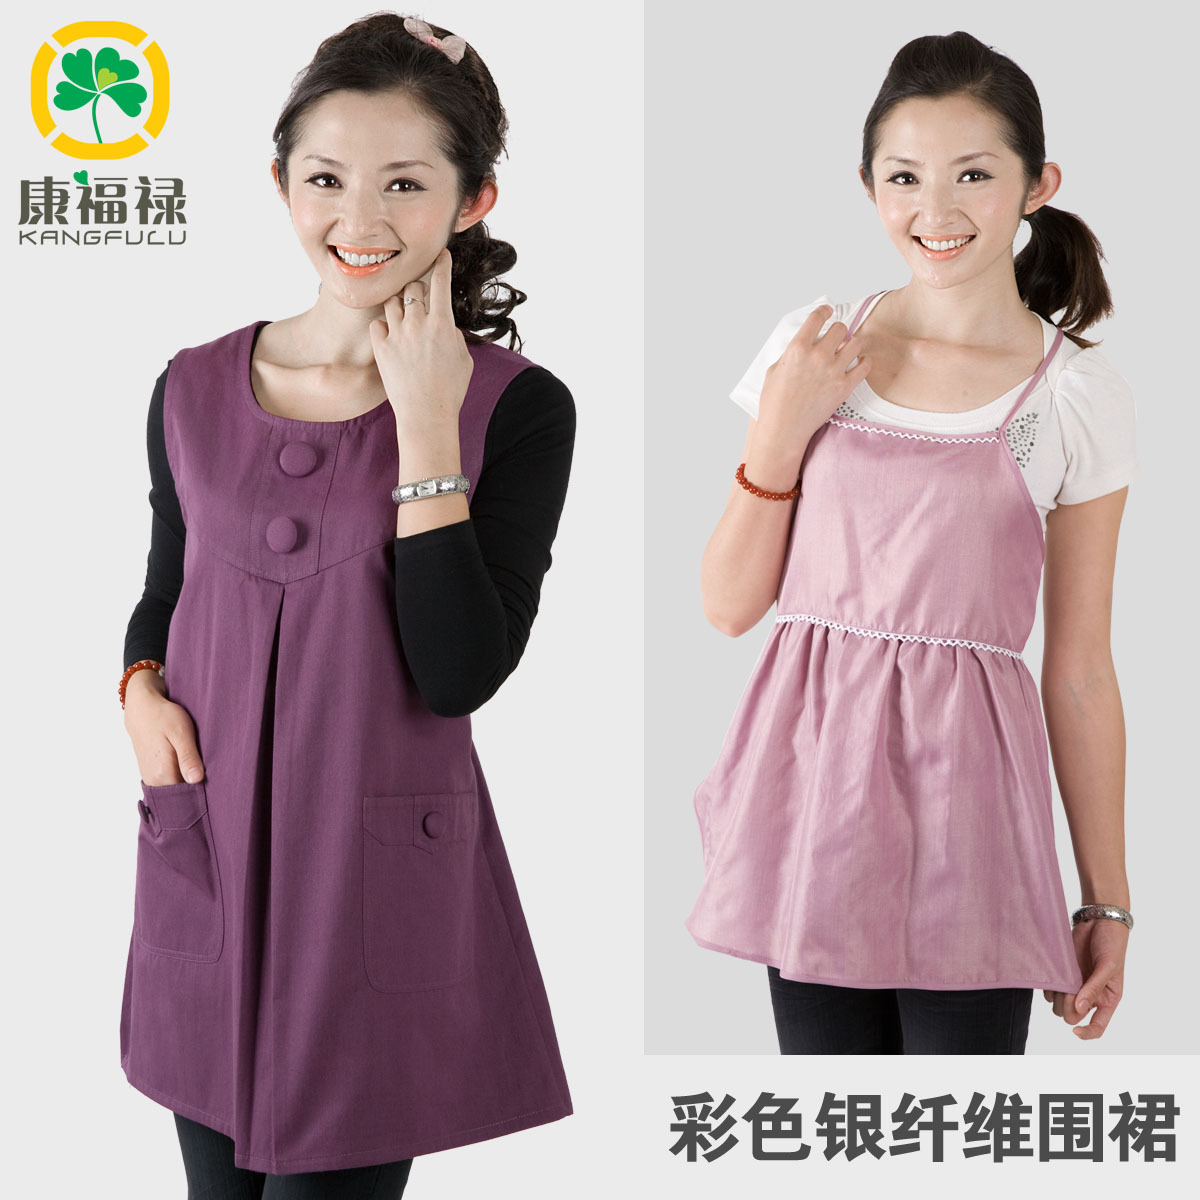 Double radiation-resistant silver fiber radiation-resistant 511y103 full maternity clothing